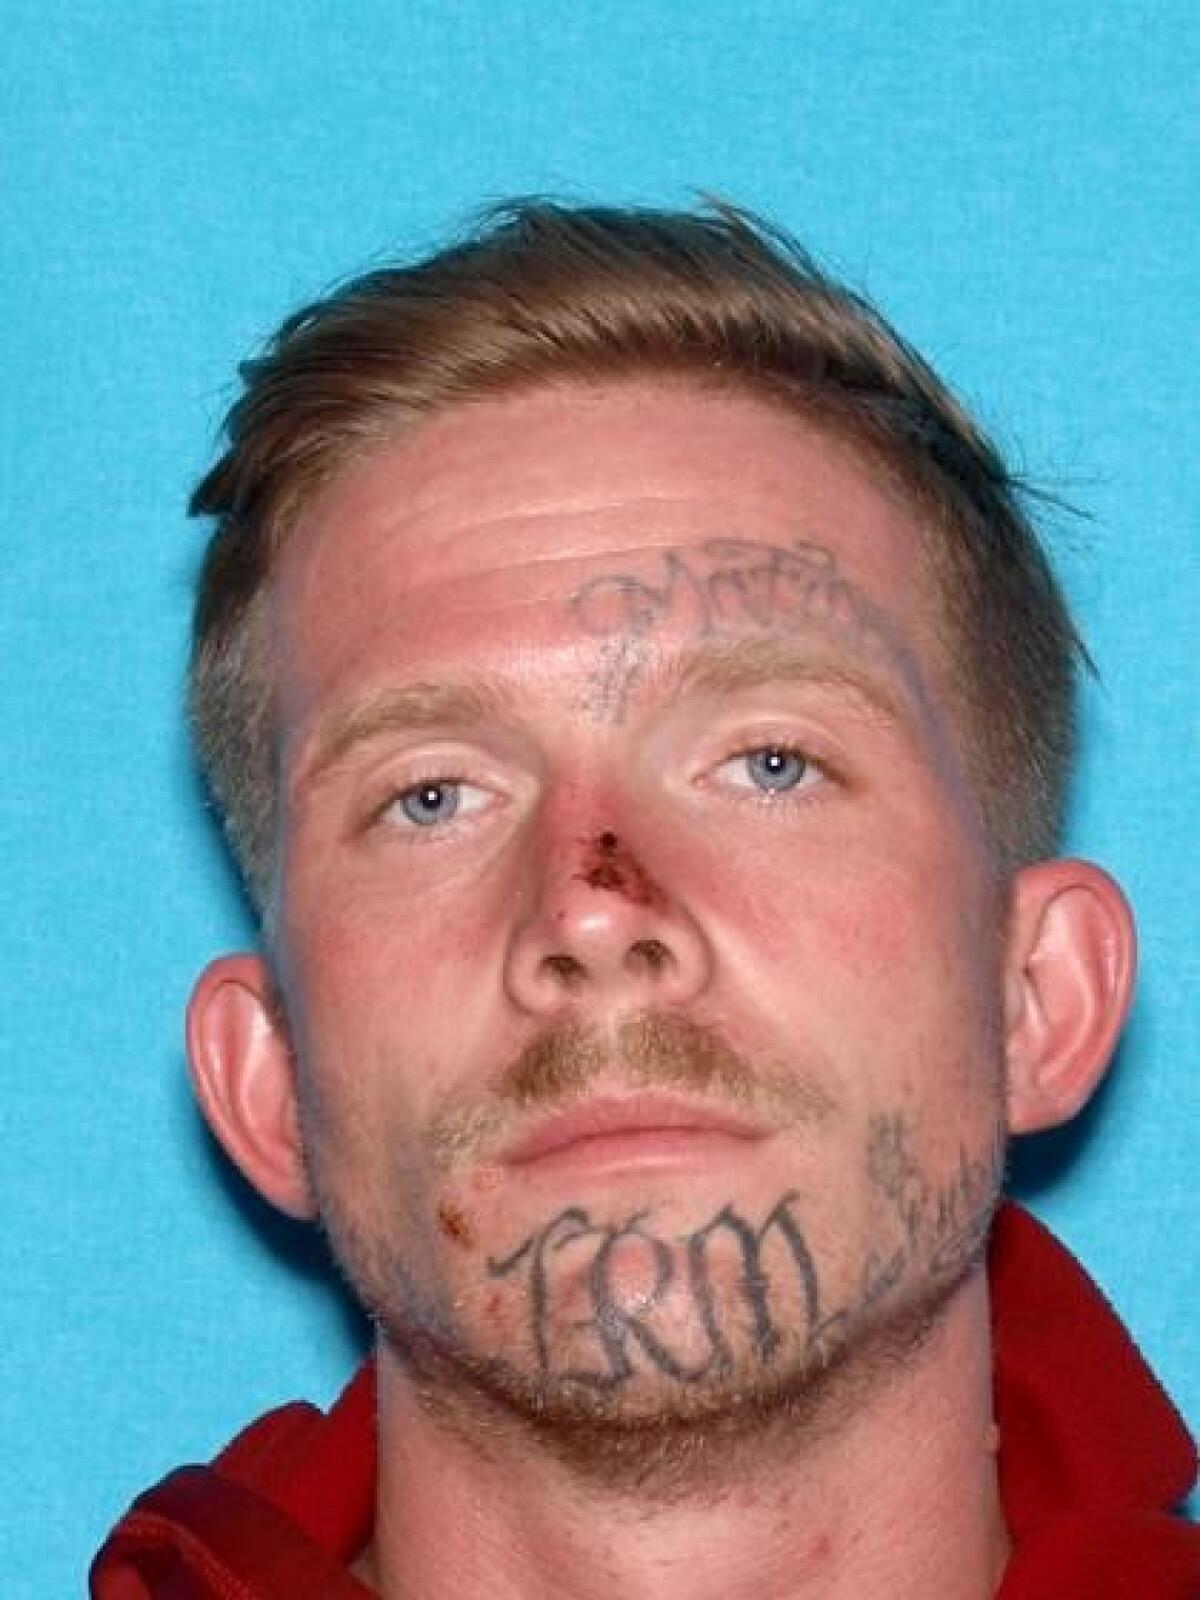 Max Diamond, 29, of Norwalk is currently at large, according to the Costa Mesa Police Department. 